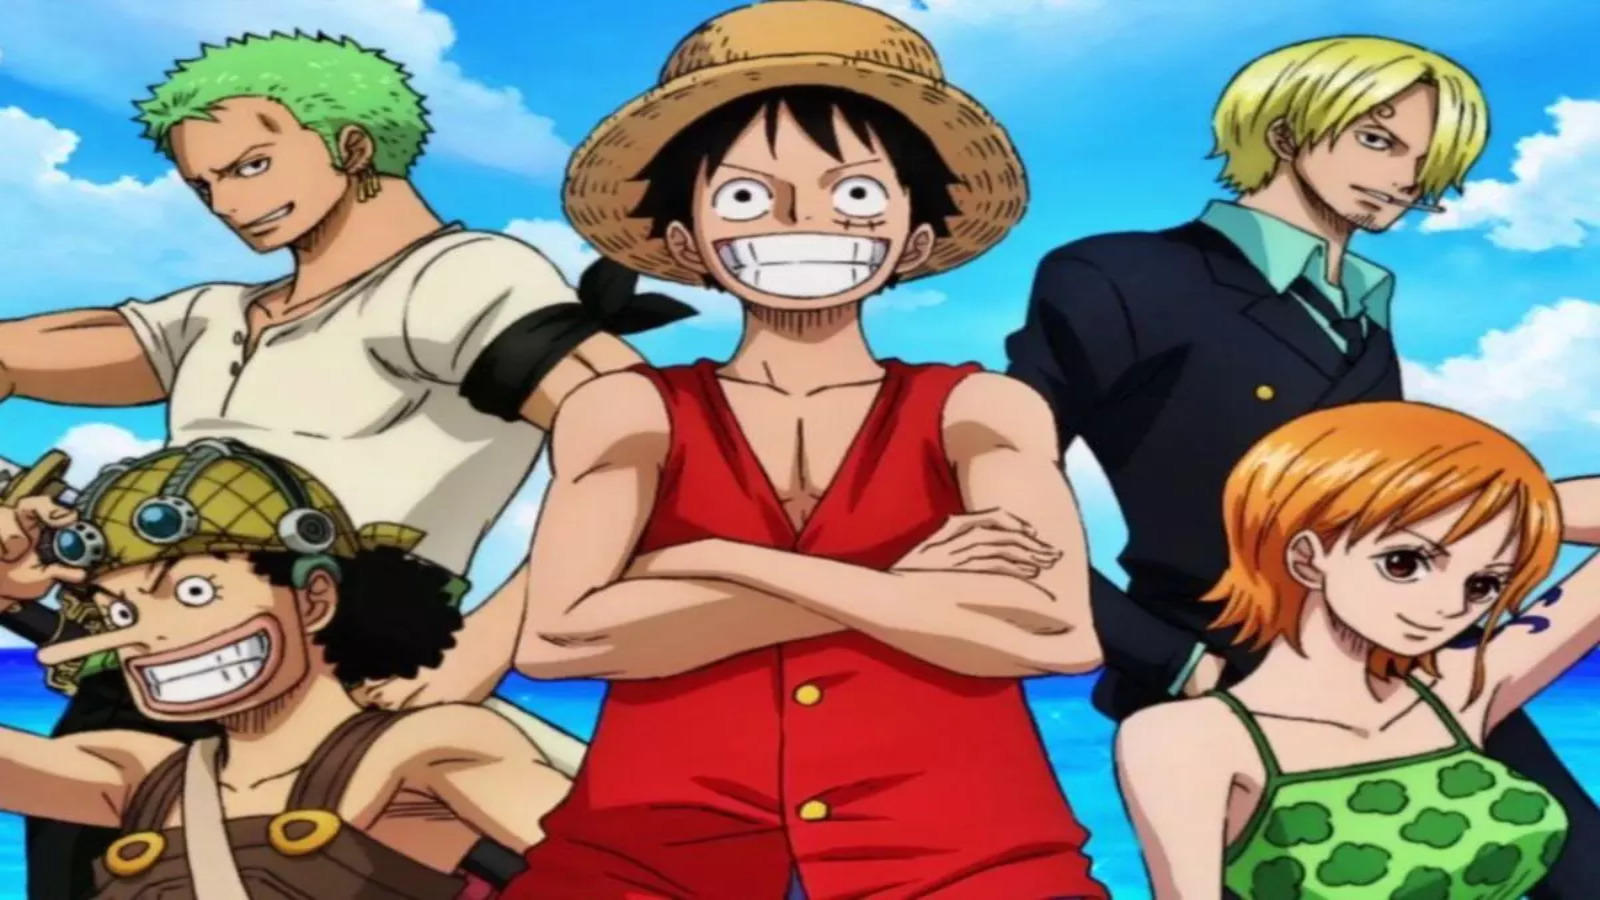 The Shocking Endgame of One Piece's Egghead Incident A Mutiny Against the World Government